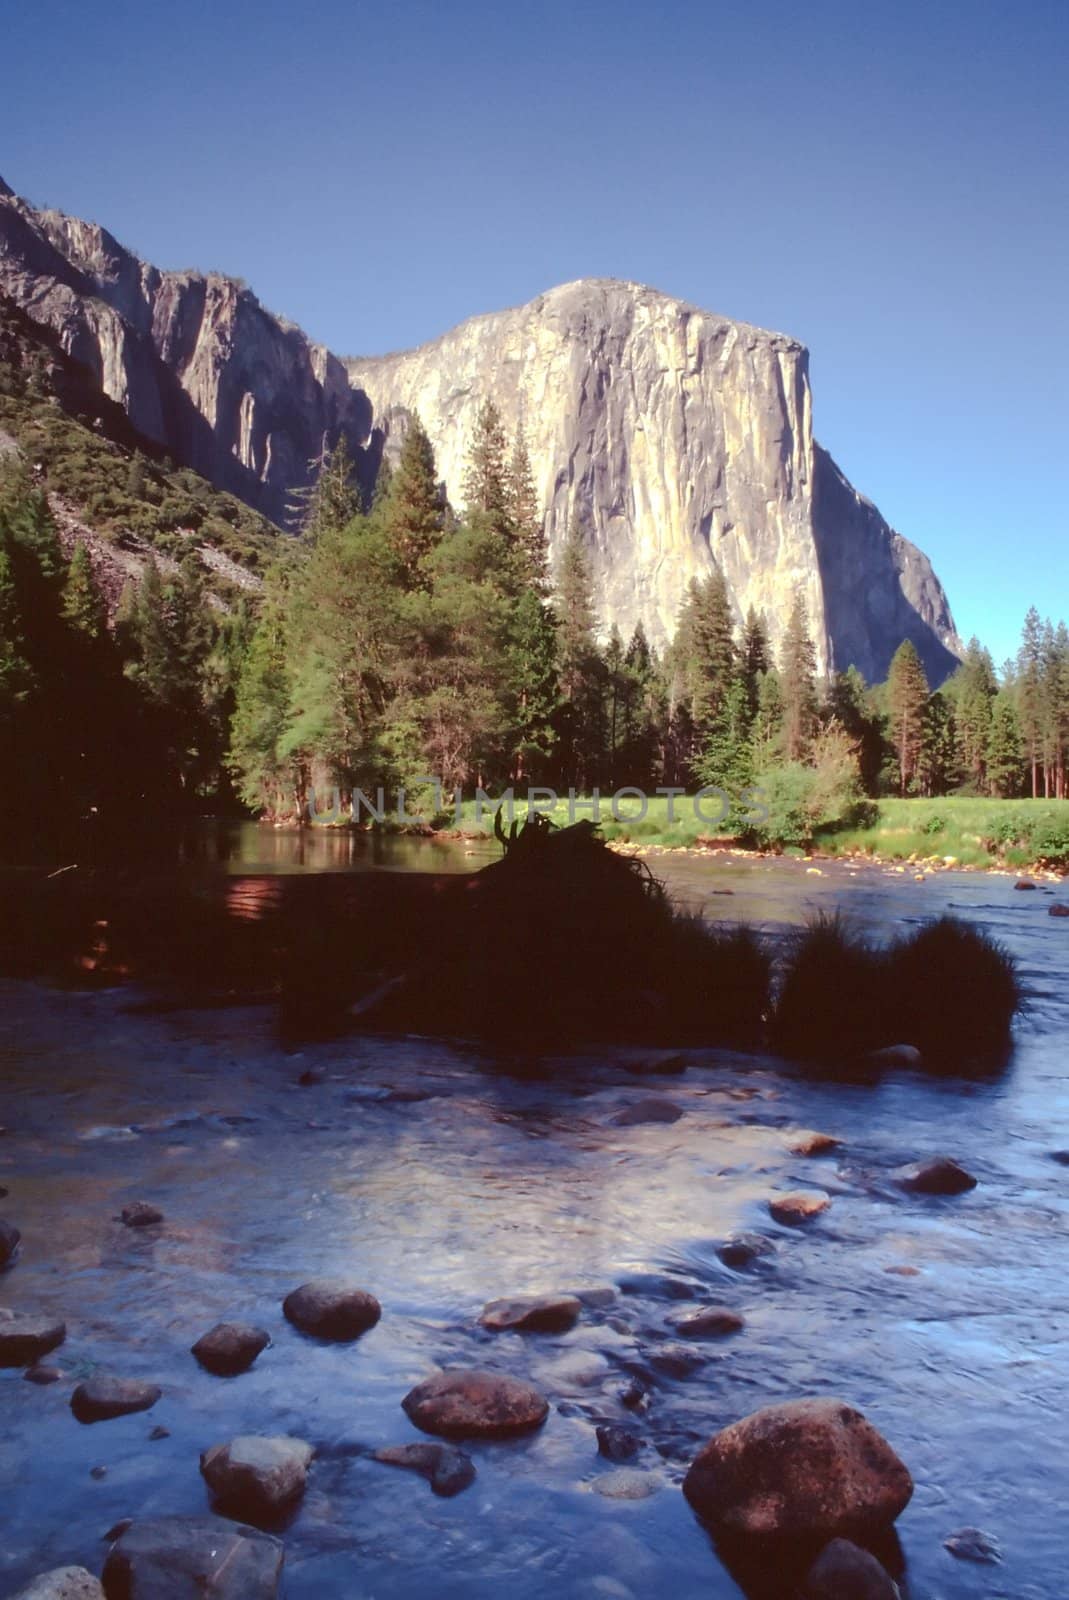 Yosemite Valley is a world-famous scenic location in the Sierra Nevada mountains of California.